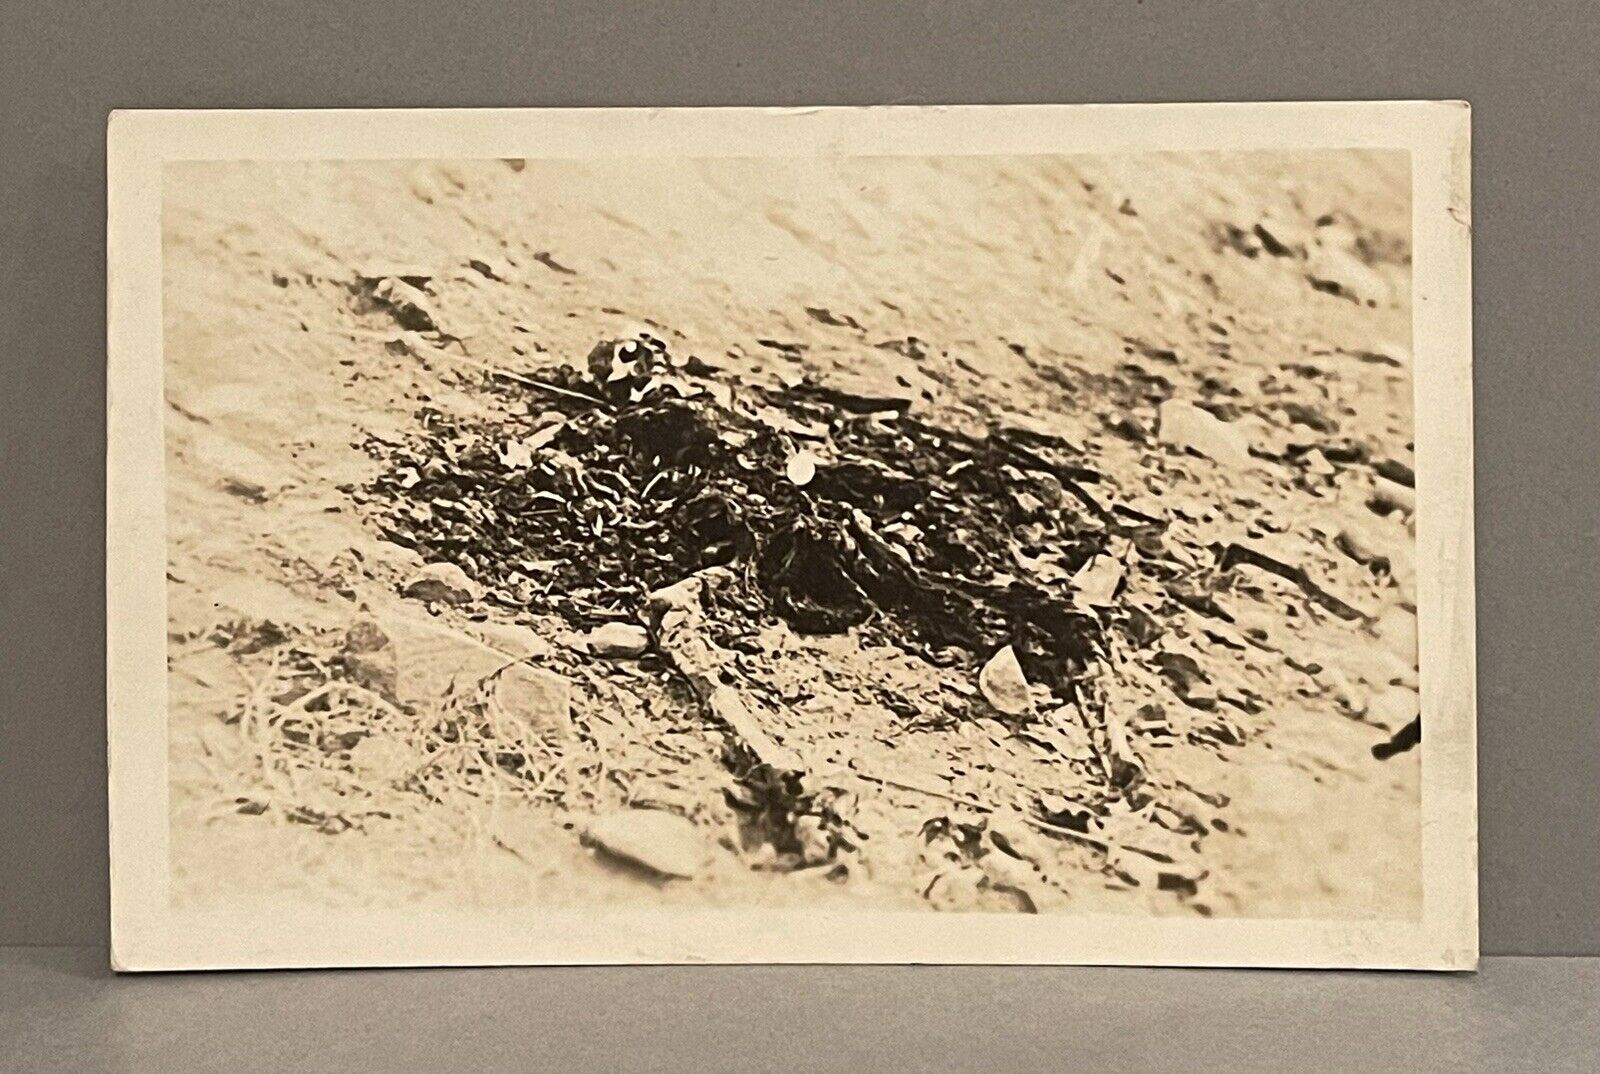 Early 1900’s RPPC of Skeletal Remains (possibly a battlefield)